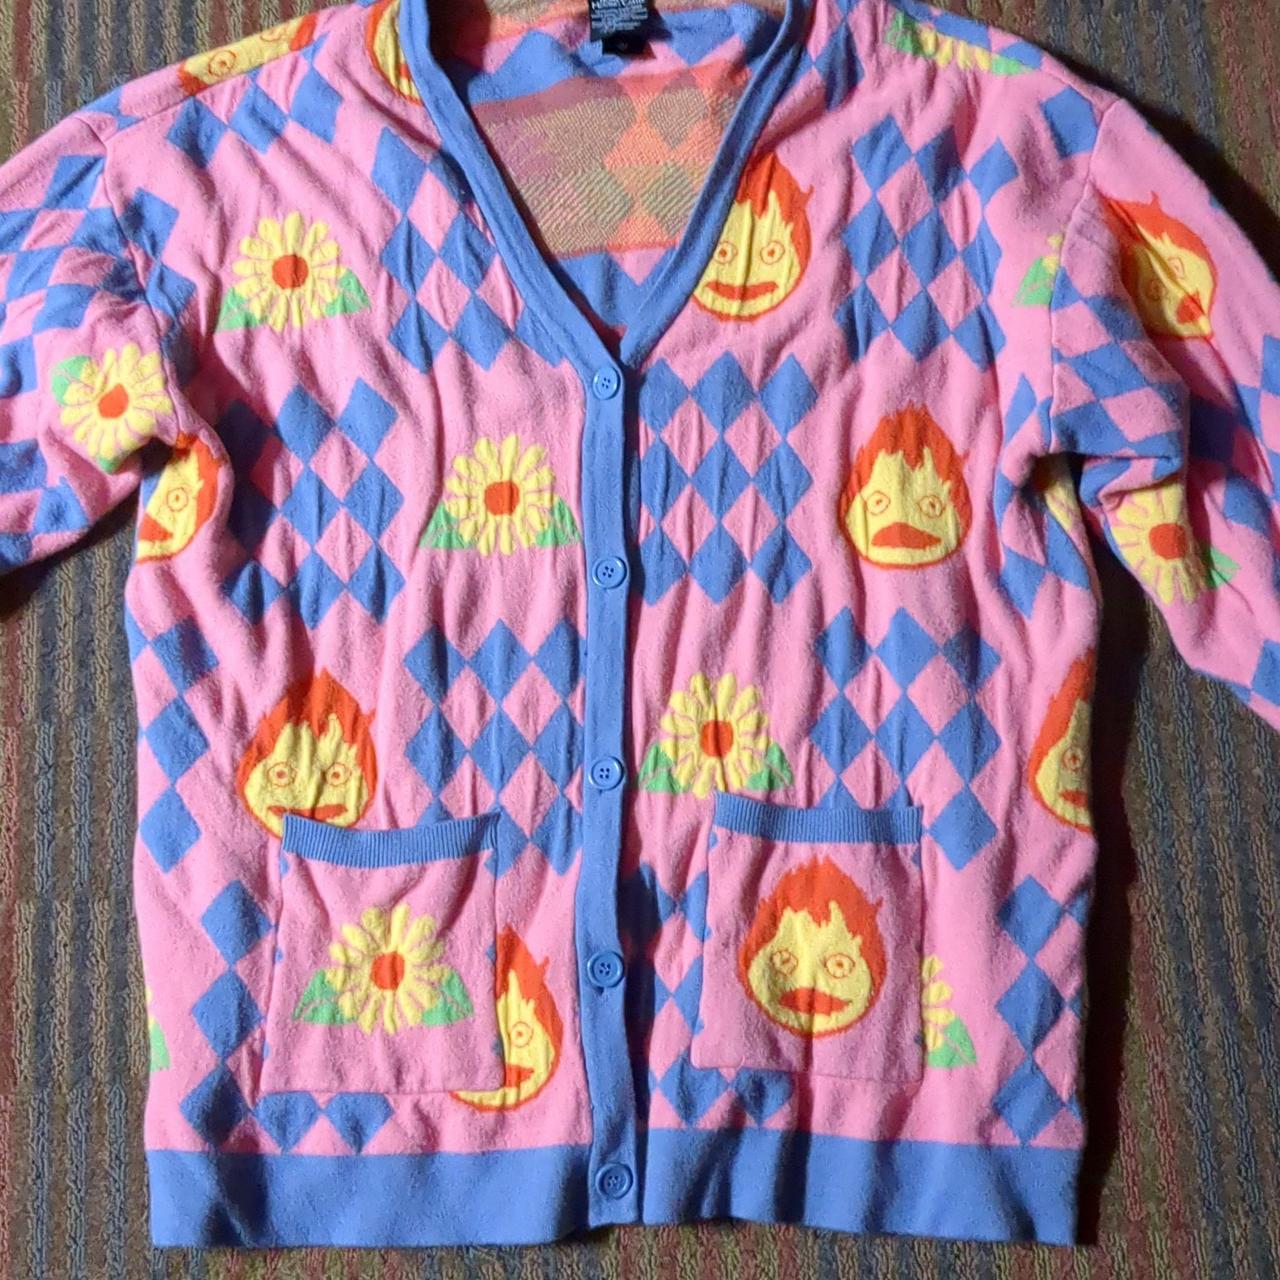 Men's Pink and Blue Cardigan (4)